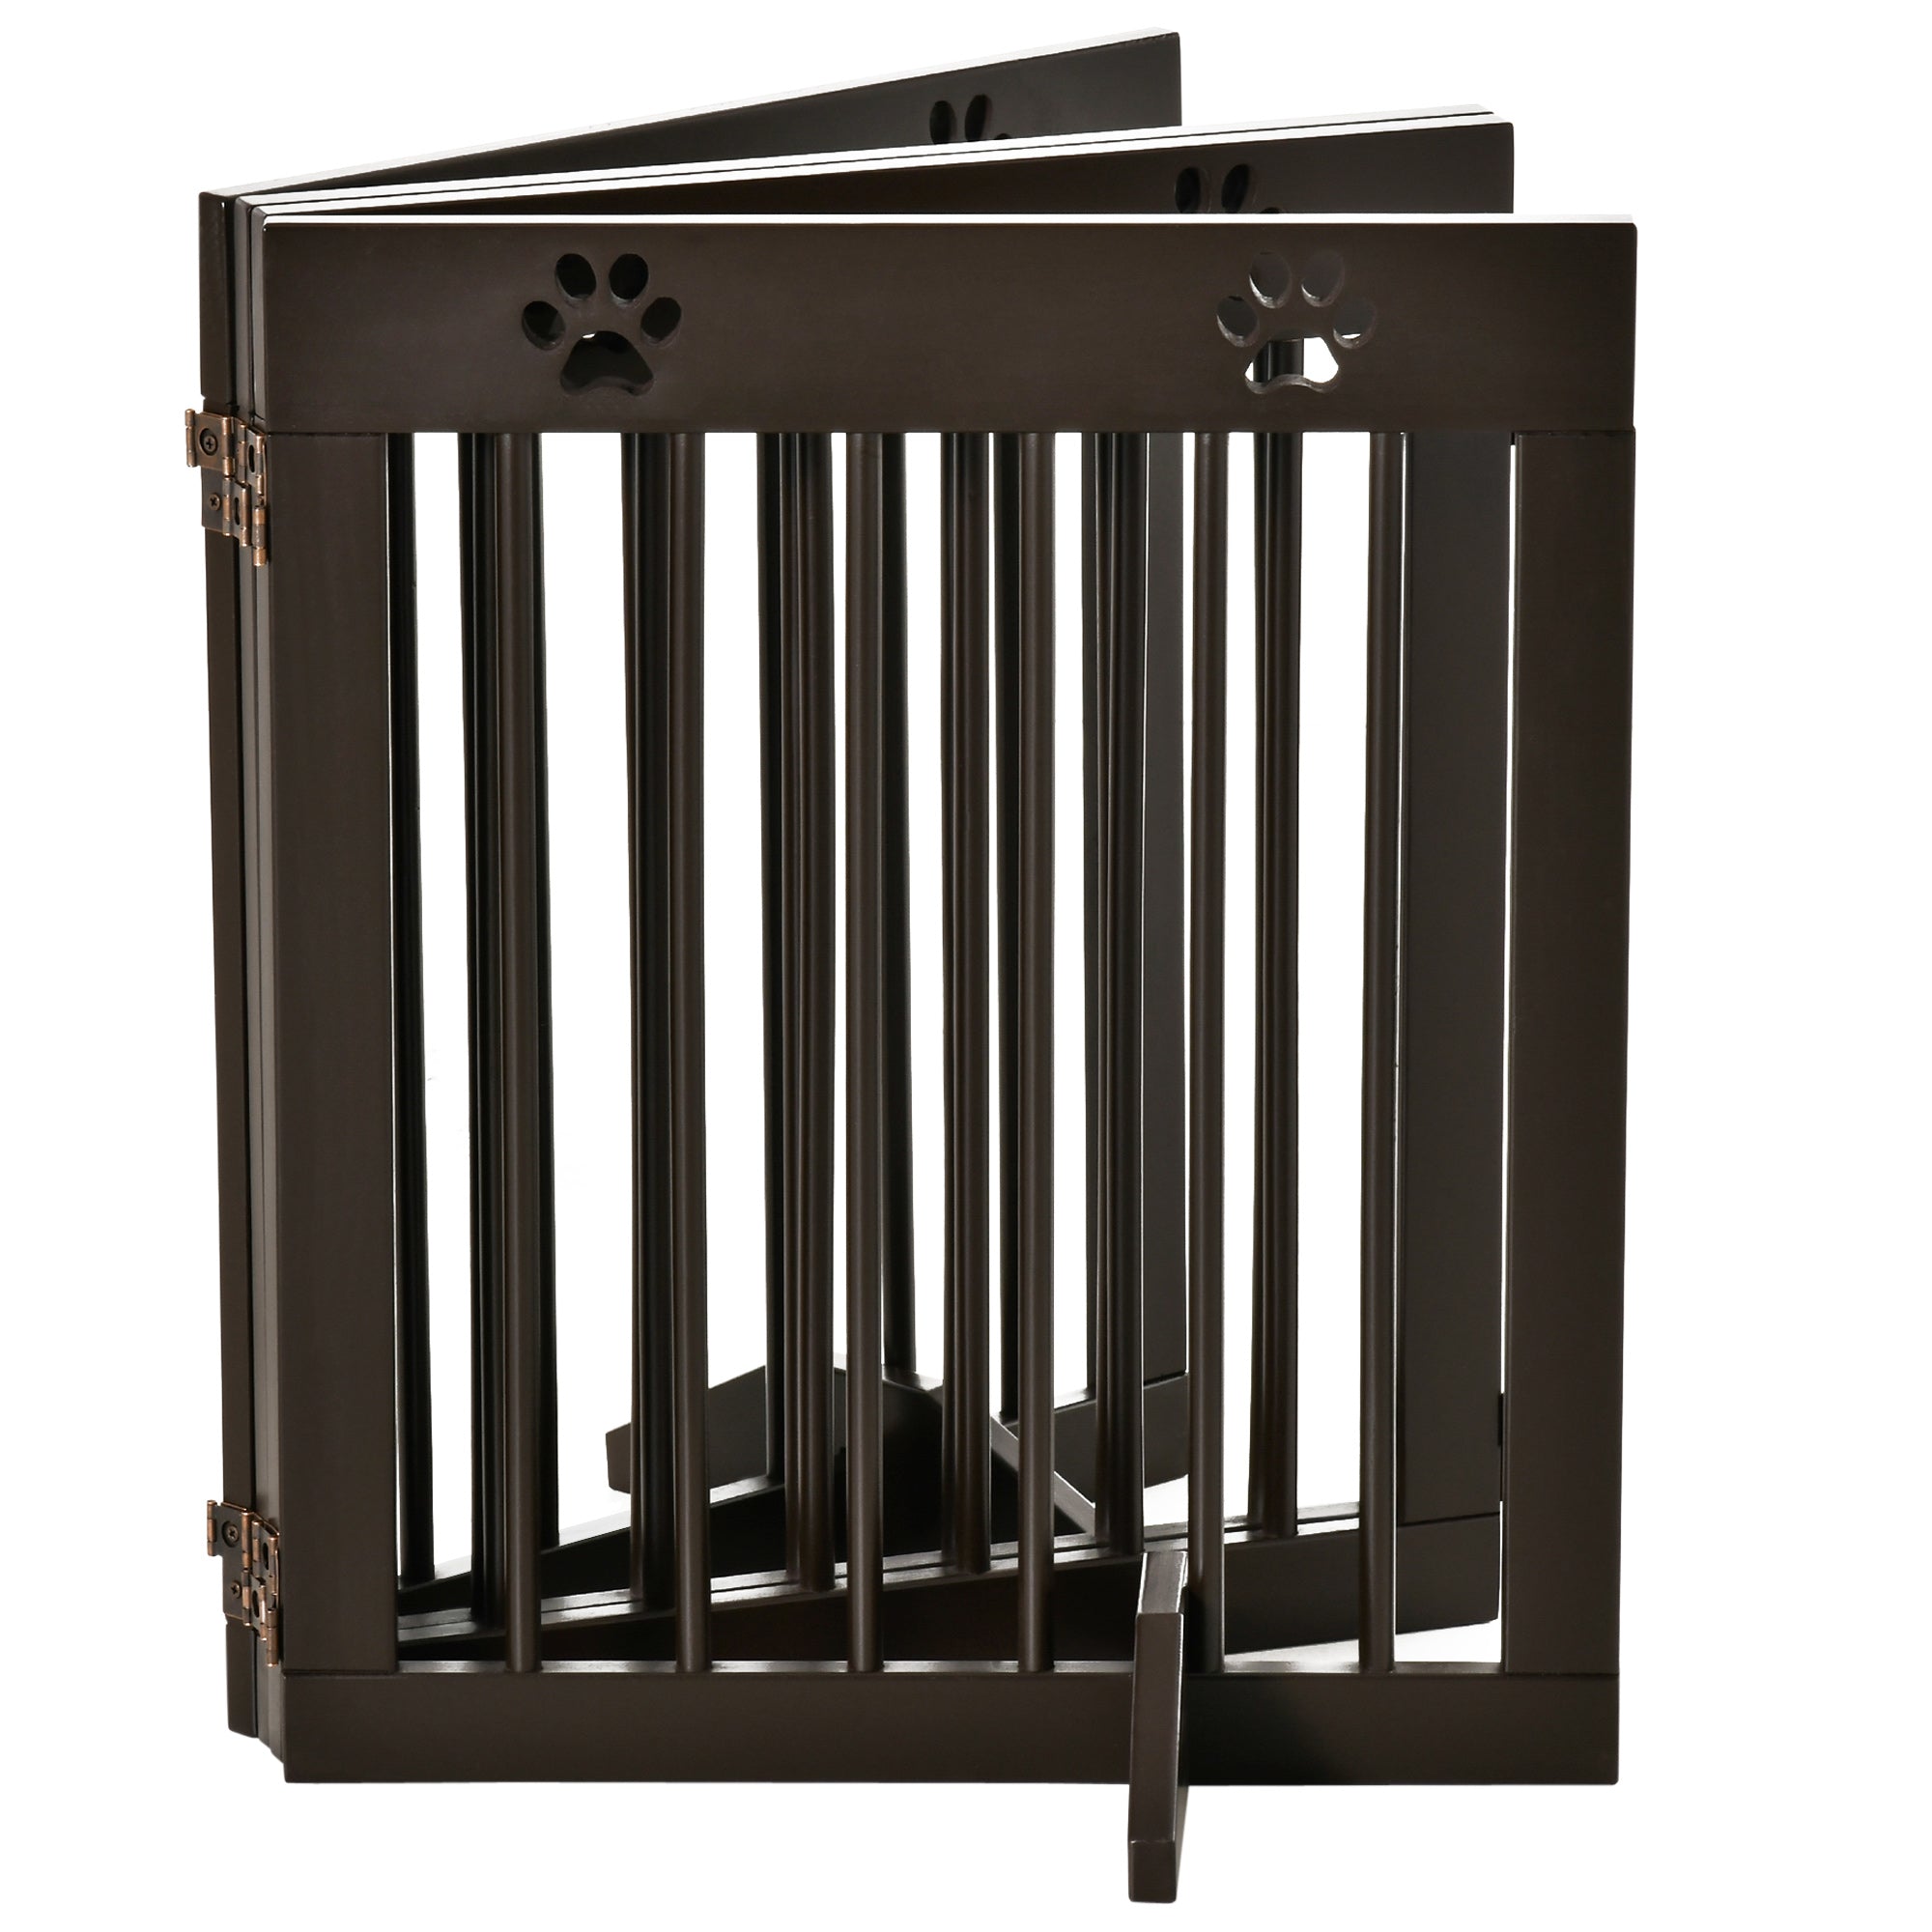 PawHut Freestanding Pet Gate， Wooden Dog Barrier， Folding Safety Fence with 4 Panel， Support Feet up to 80.25